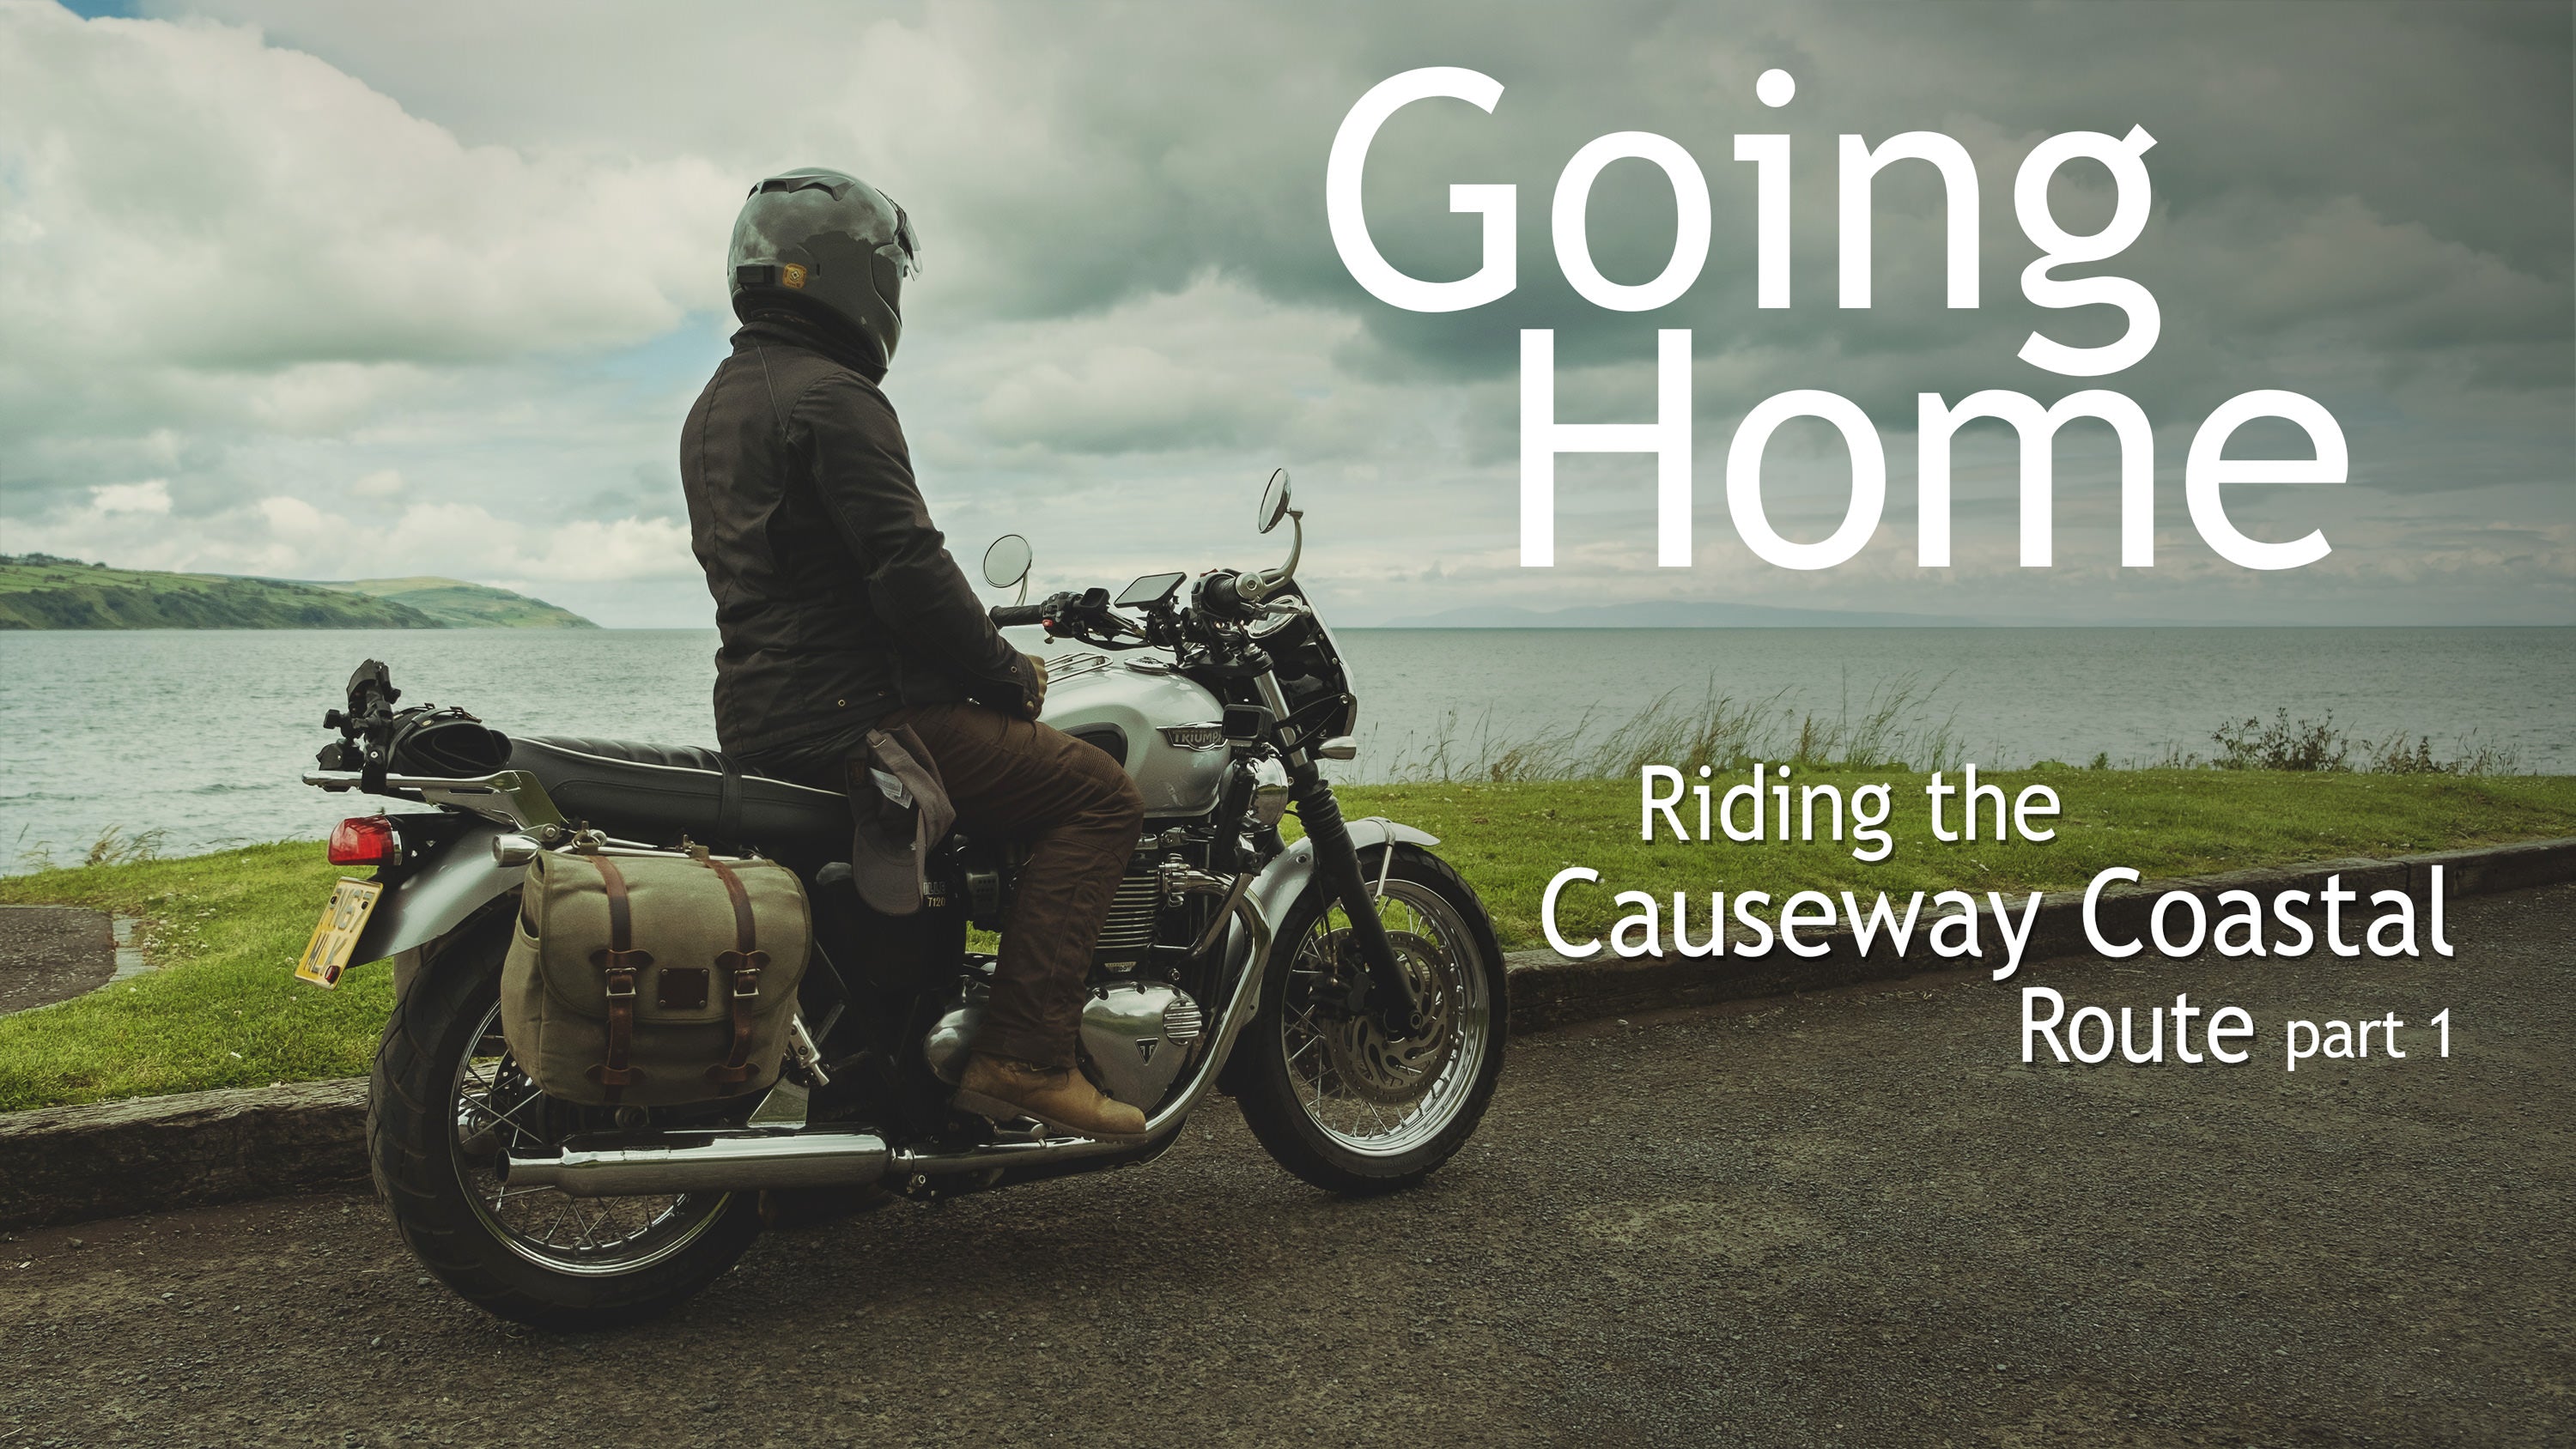 Load video: A motorcycle ride through the countryside